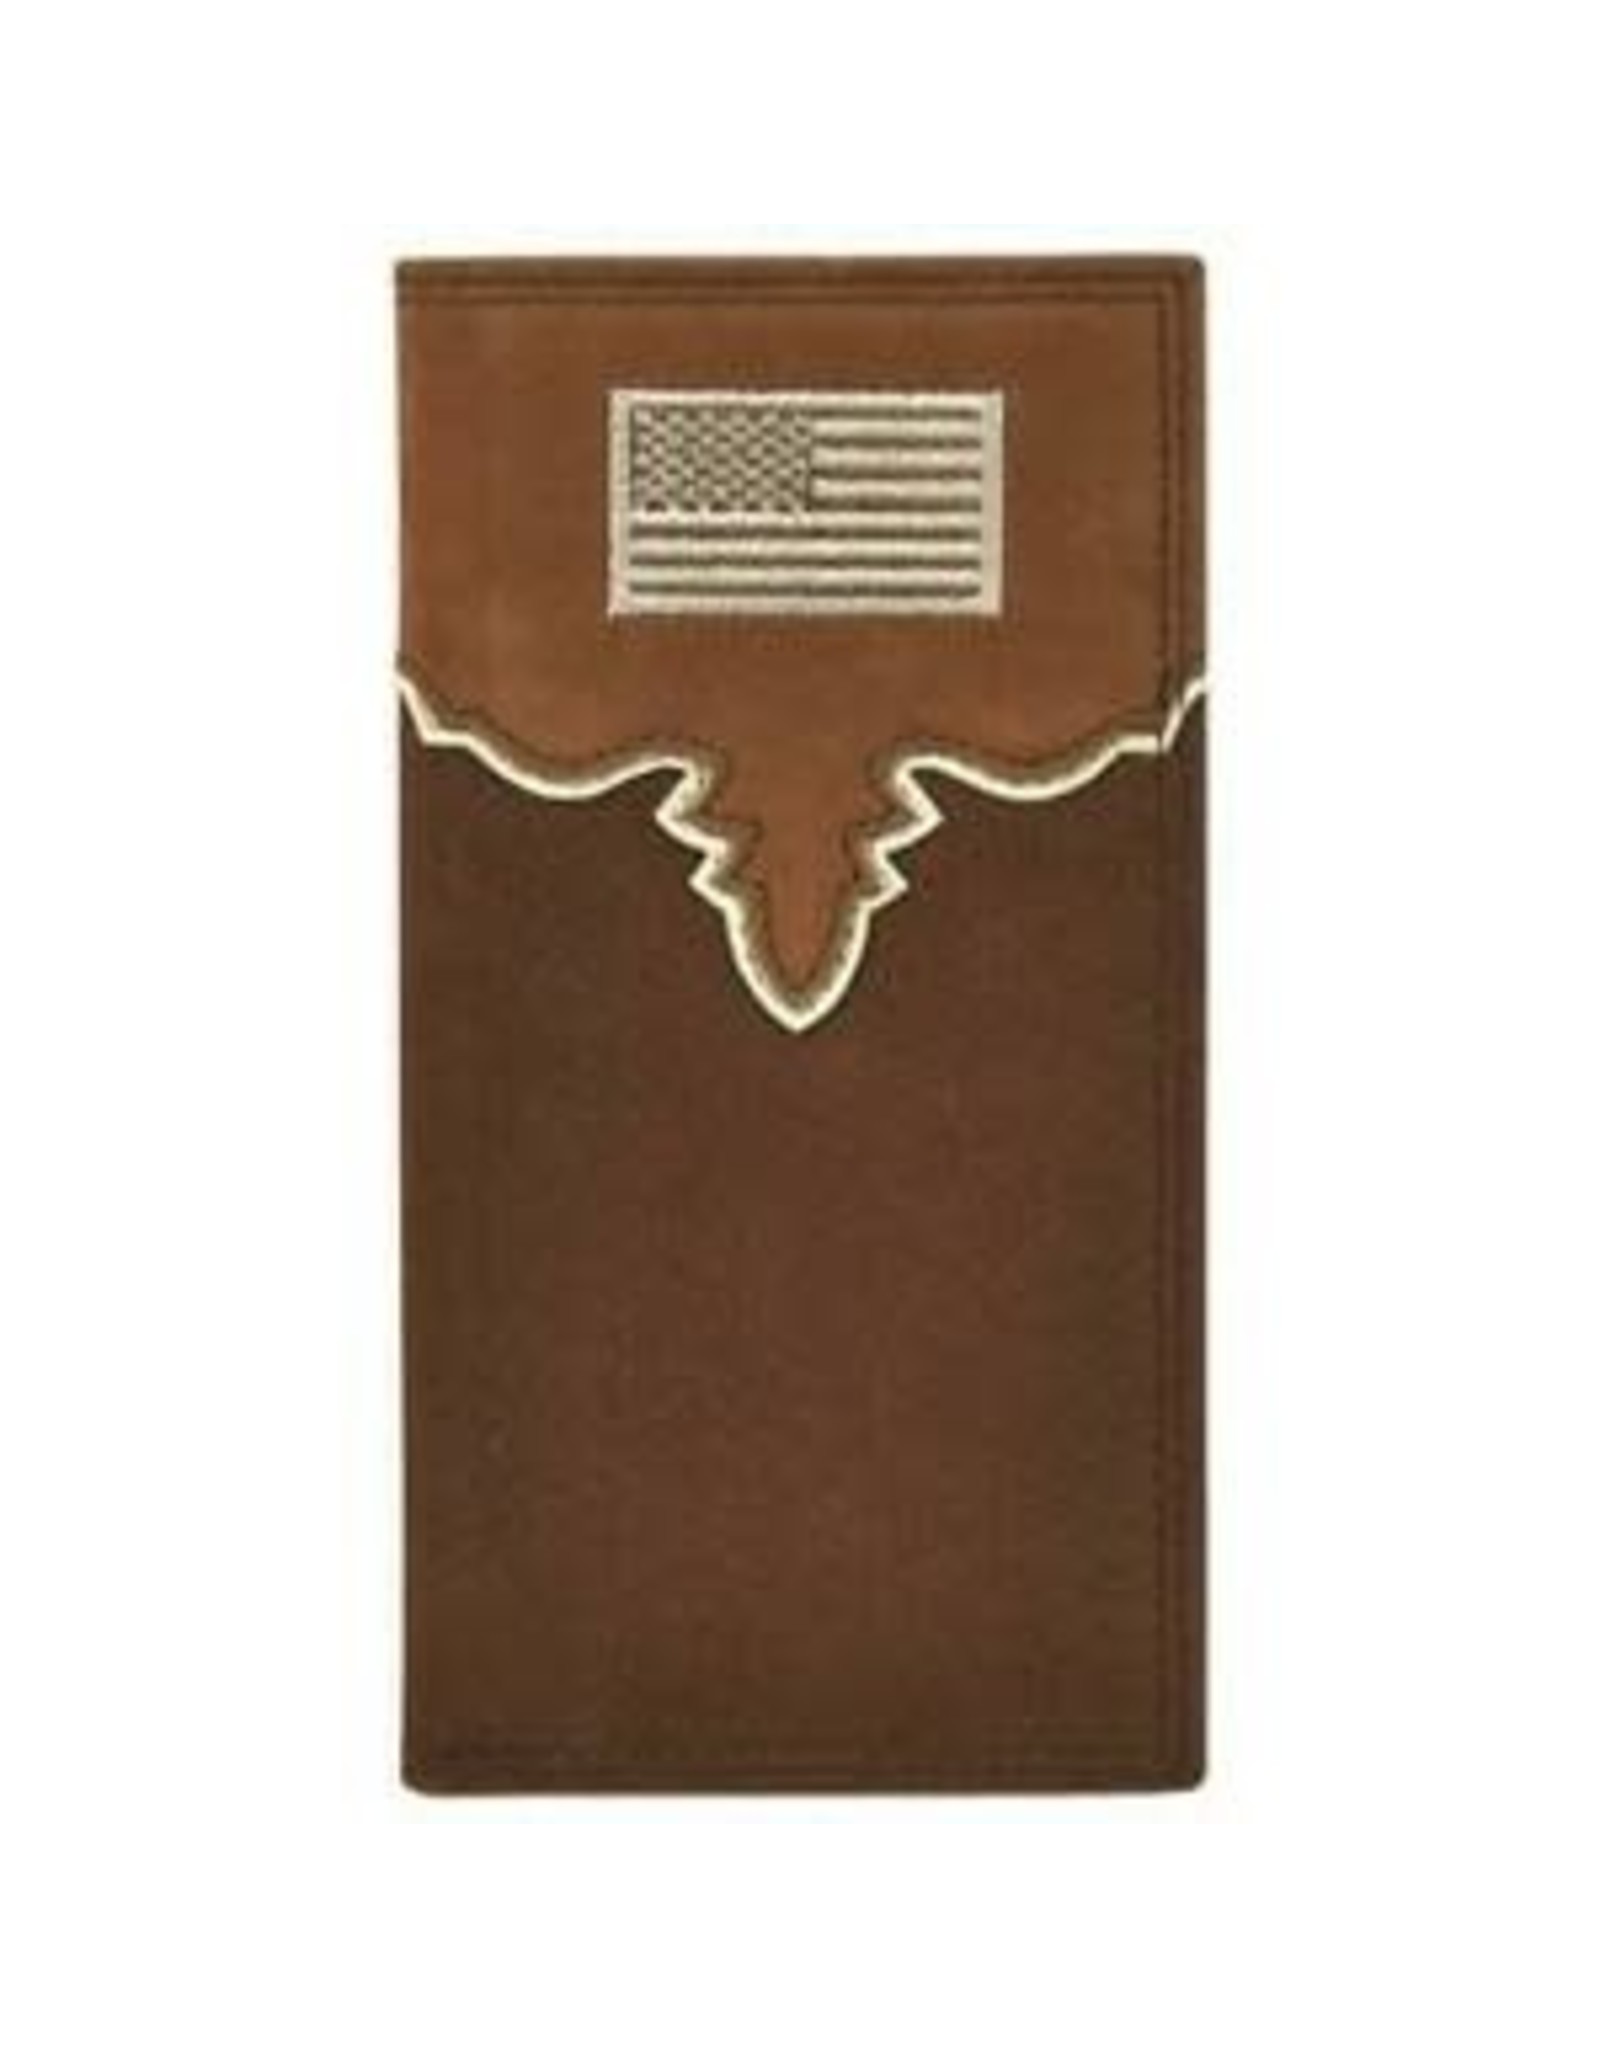 Justin Super Soft American Flag 2030767W2 Rodeo Wallet